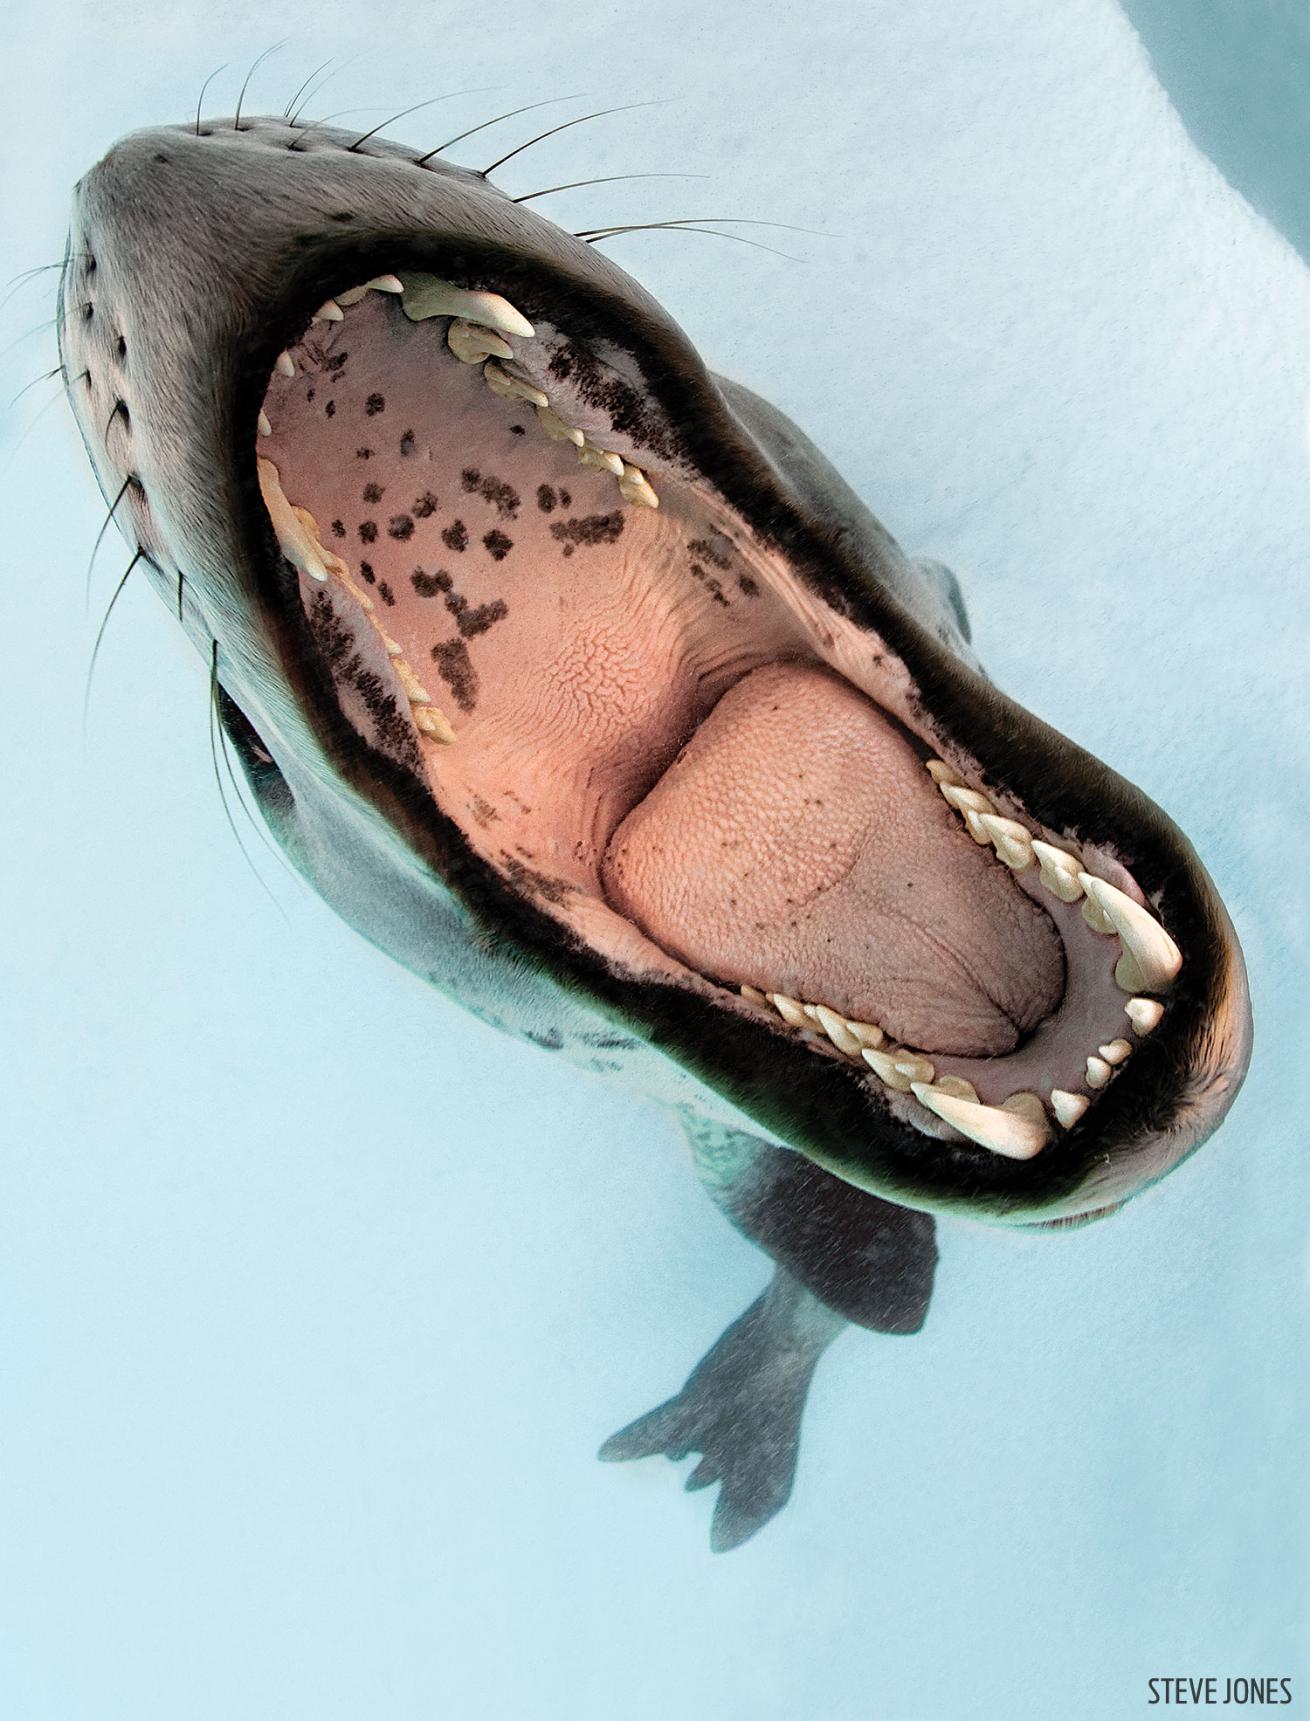 Leopard Seal Mouth Open in Antarctic